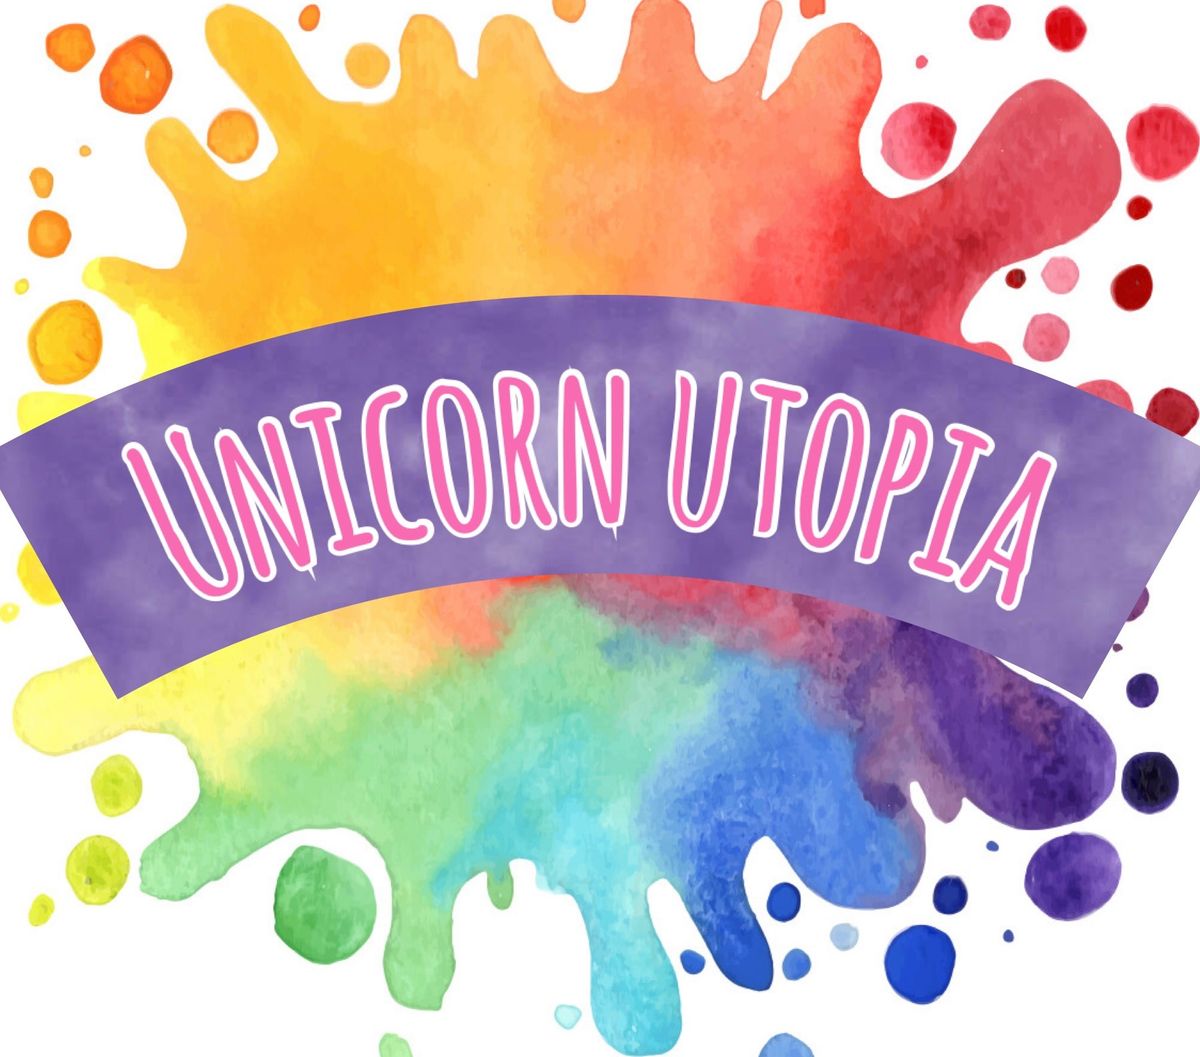 \ud83e\udd84\ud83c\udf08UNICORN UTOPIA\ud83c\udf08\ud83e\udd84 SPOTS ARE LIMITED!